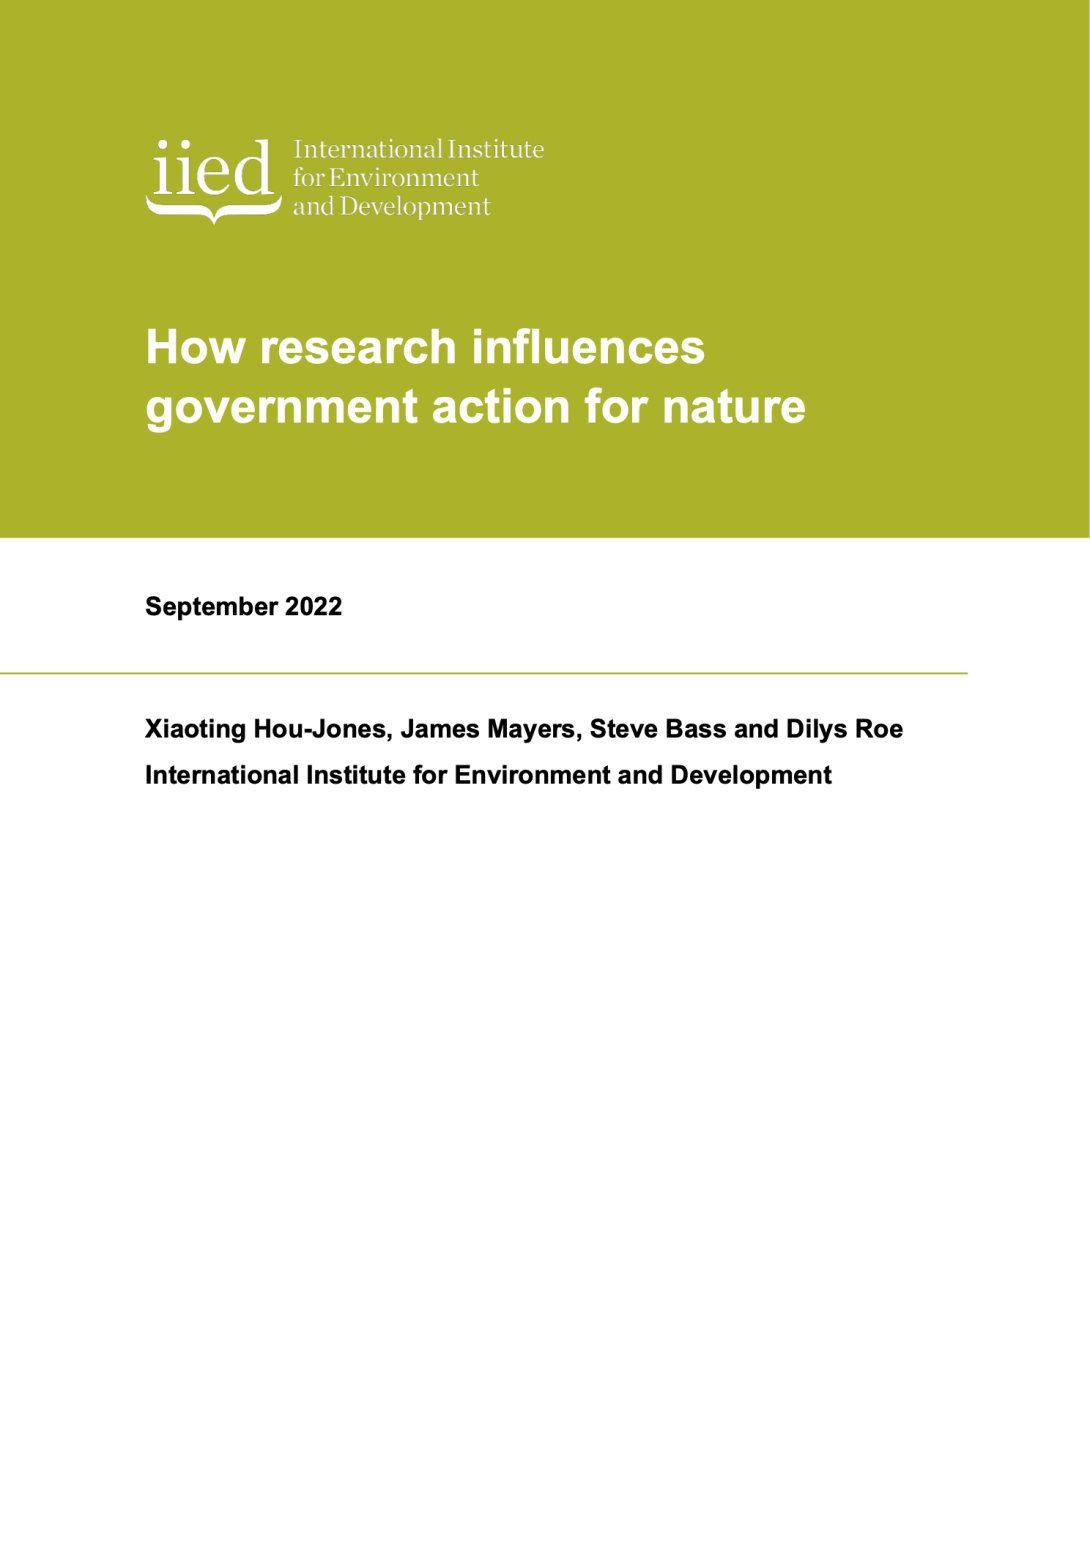 How research influences government action for nature